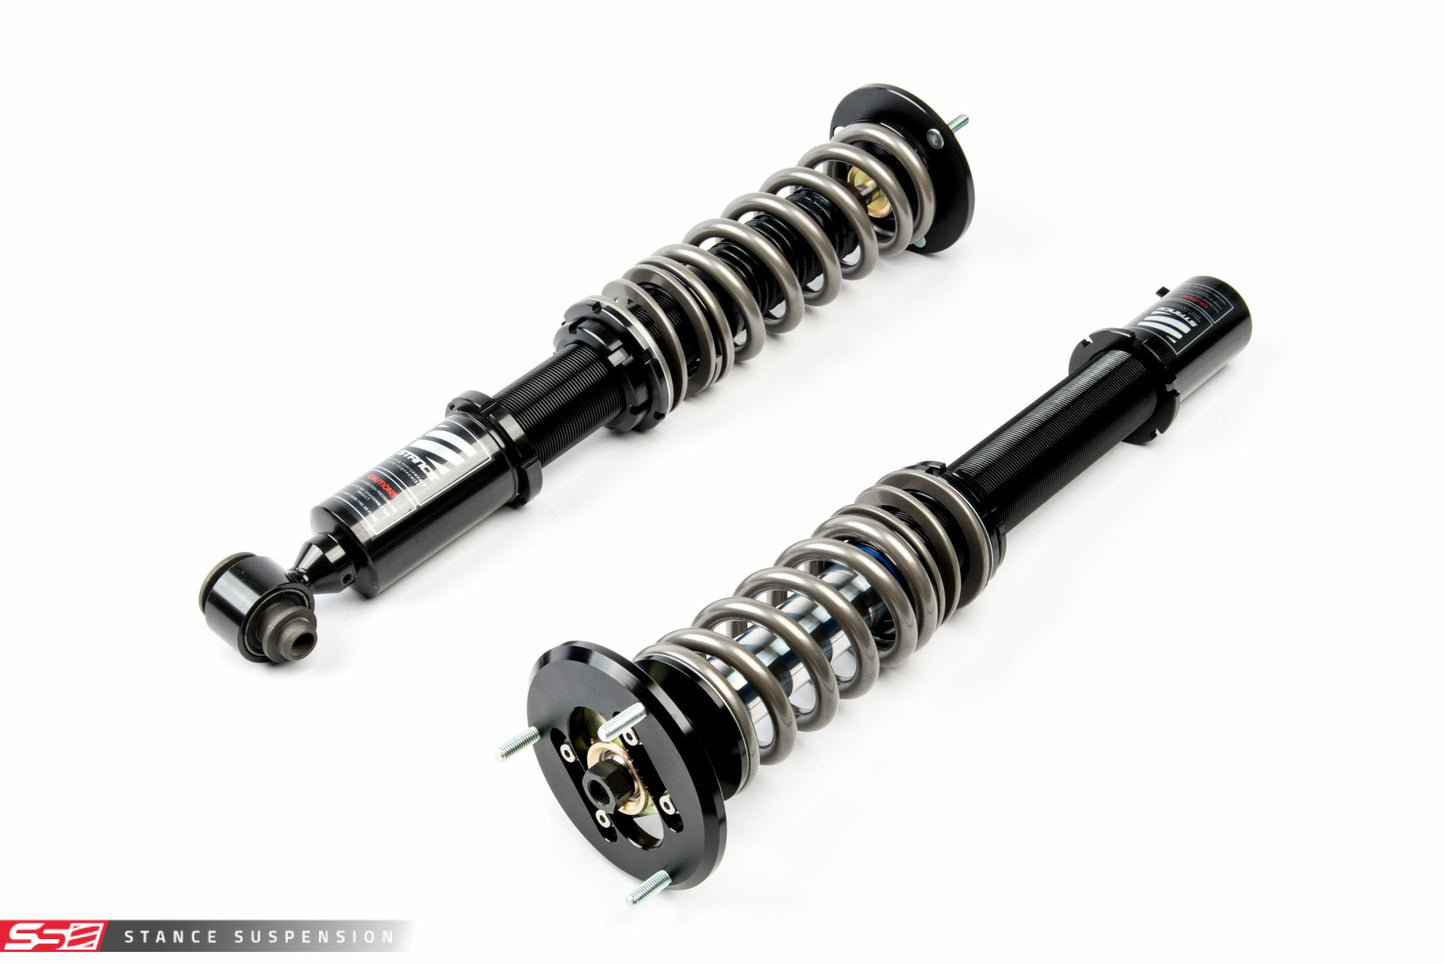 Stance Suspension - XR1 Coilovers for 98-03 BMW M5 E39 (ST-E39-XR1)